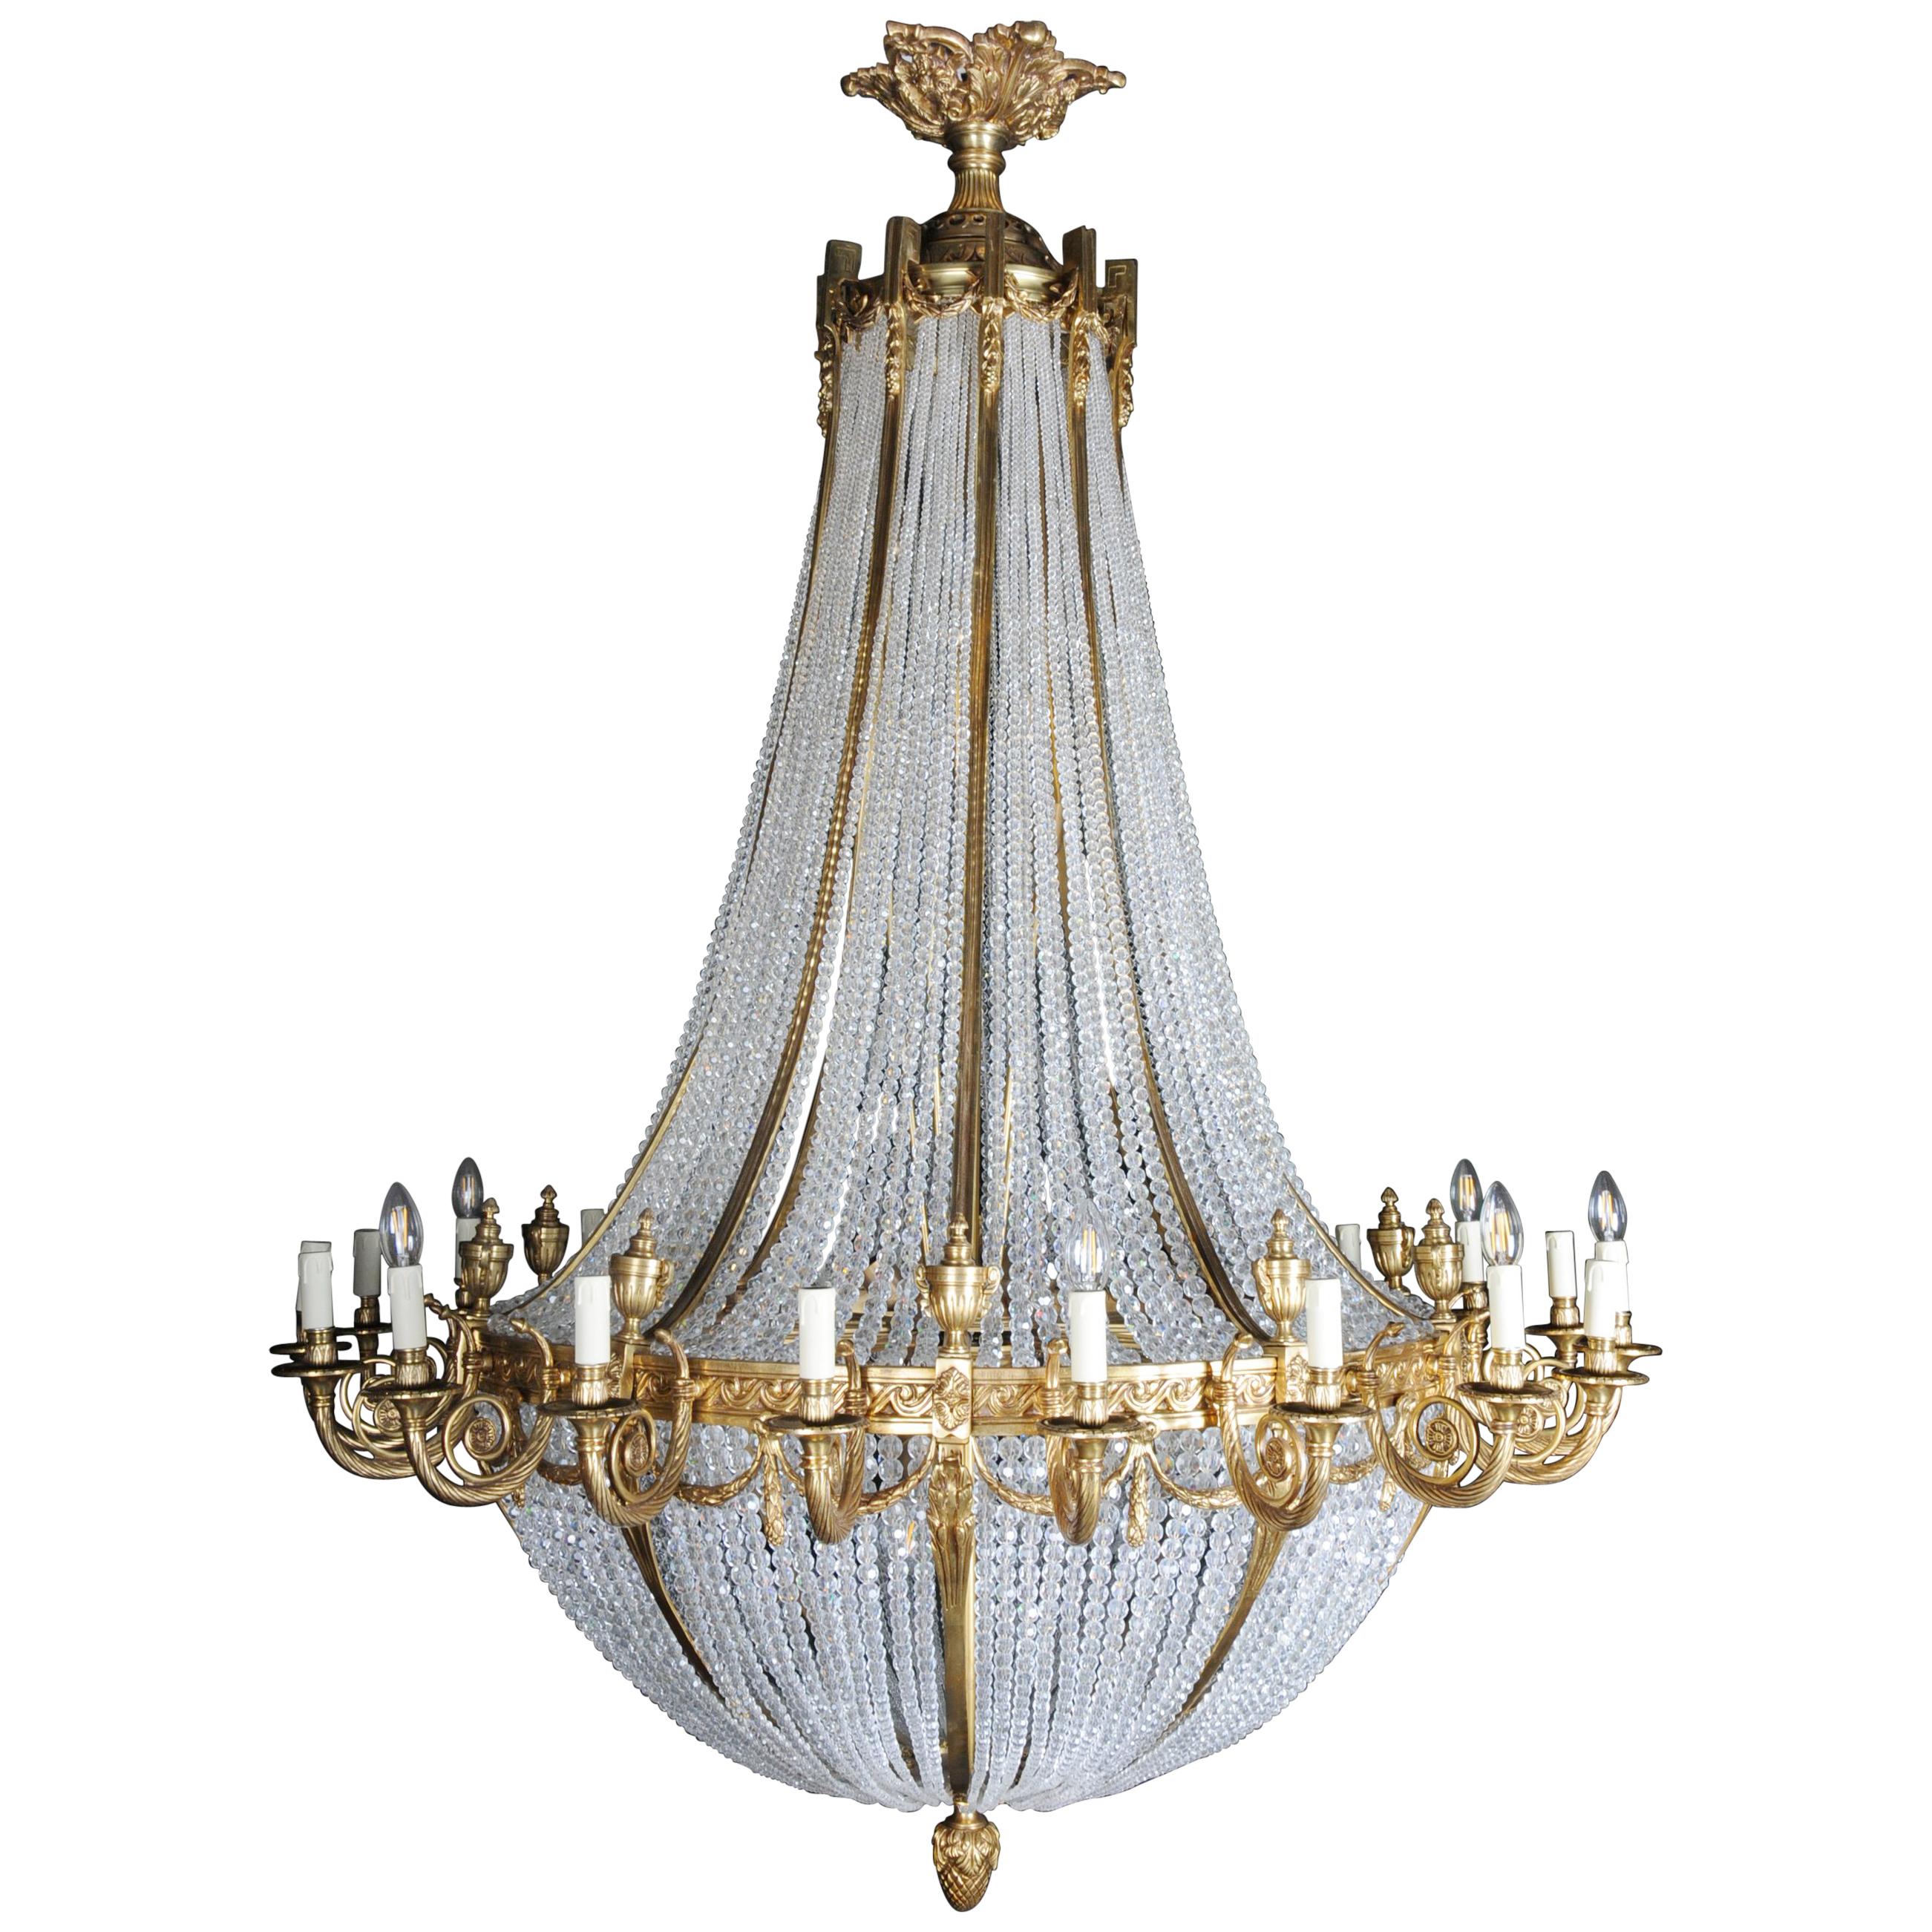 Monumental, noble ceiling chandelier in the Louis-Seize style